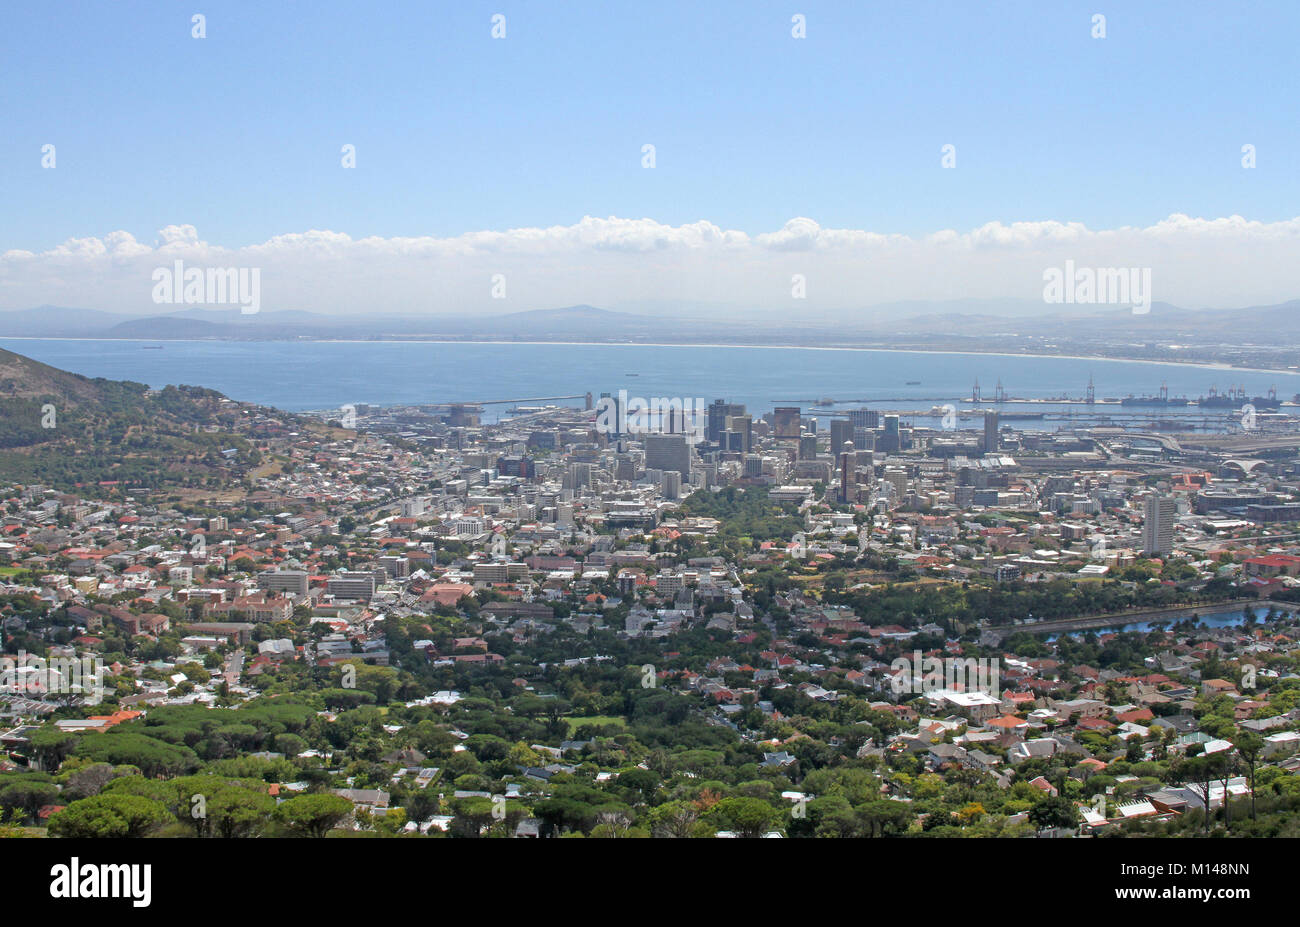 View of Cape Town from Table Mountain, Western Cape, South Africa. Stock Photo